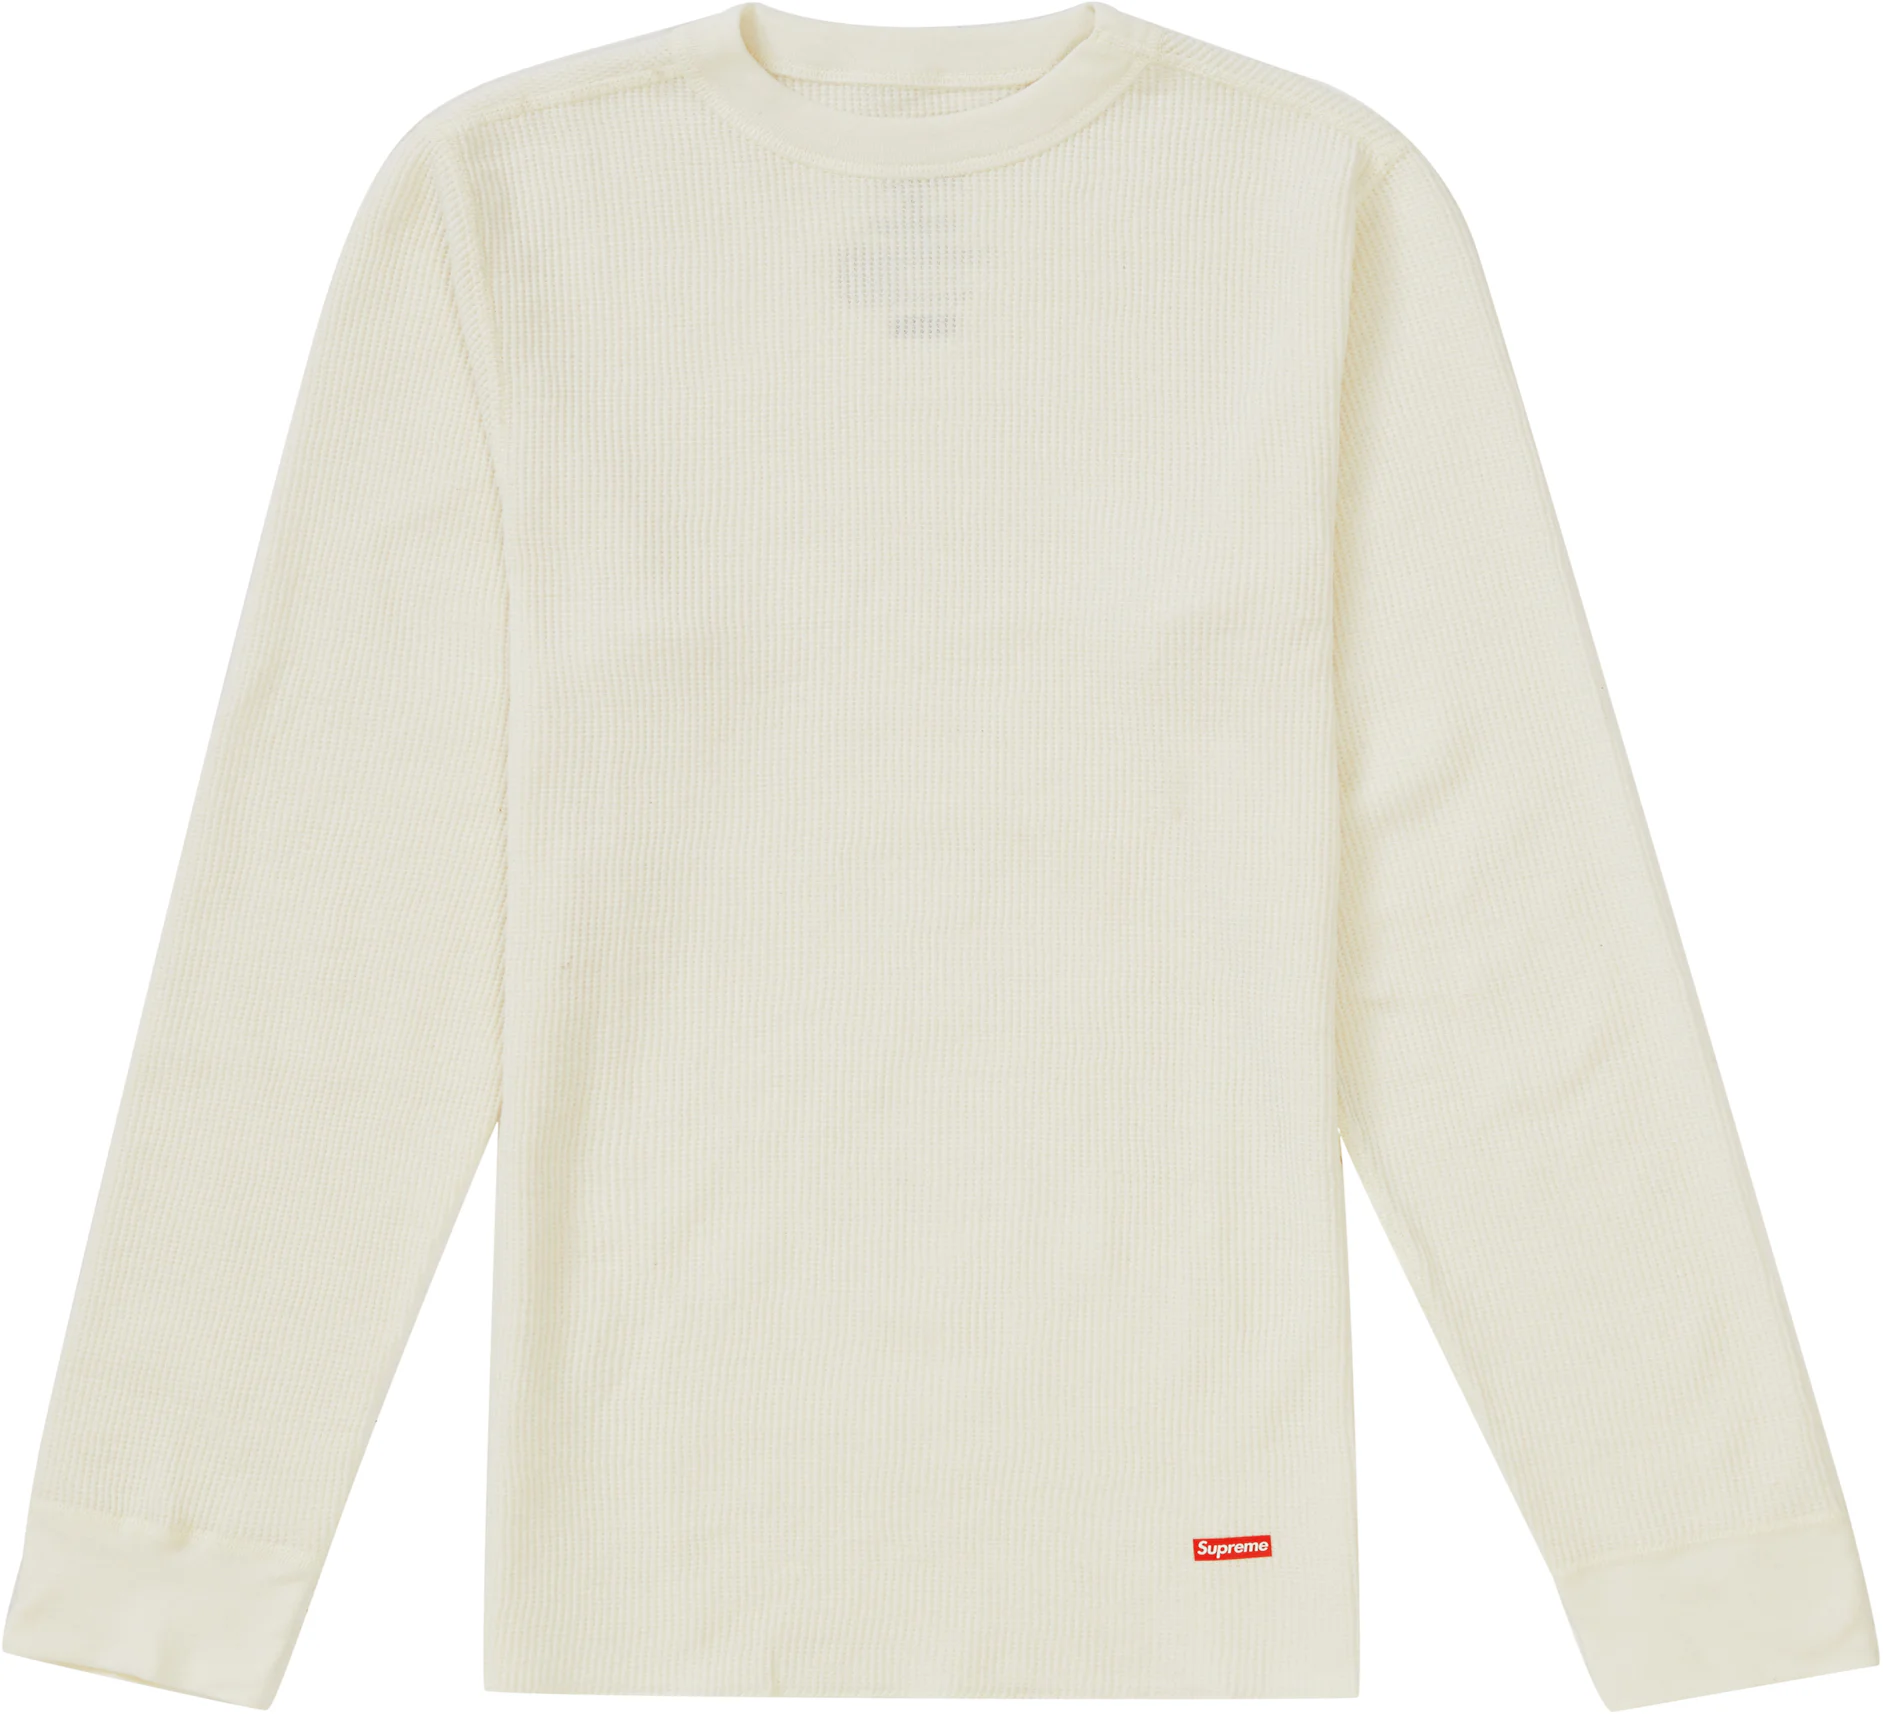 Supreme® Hanes Thermal Crew 1-Pack L/S Top Size XL FW22 Brand New